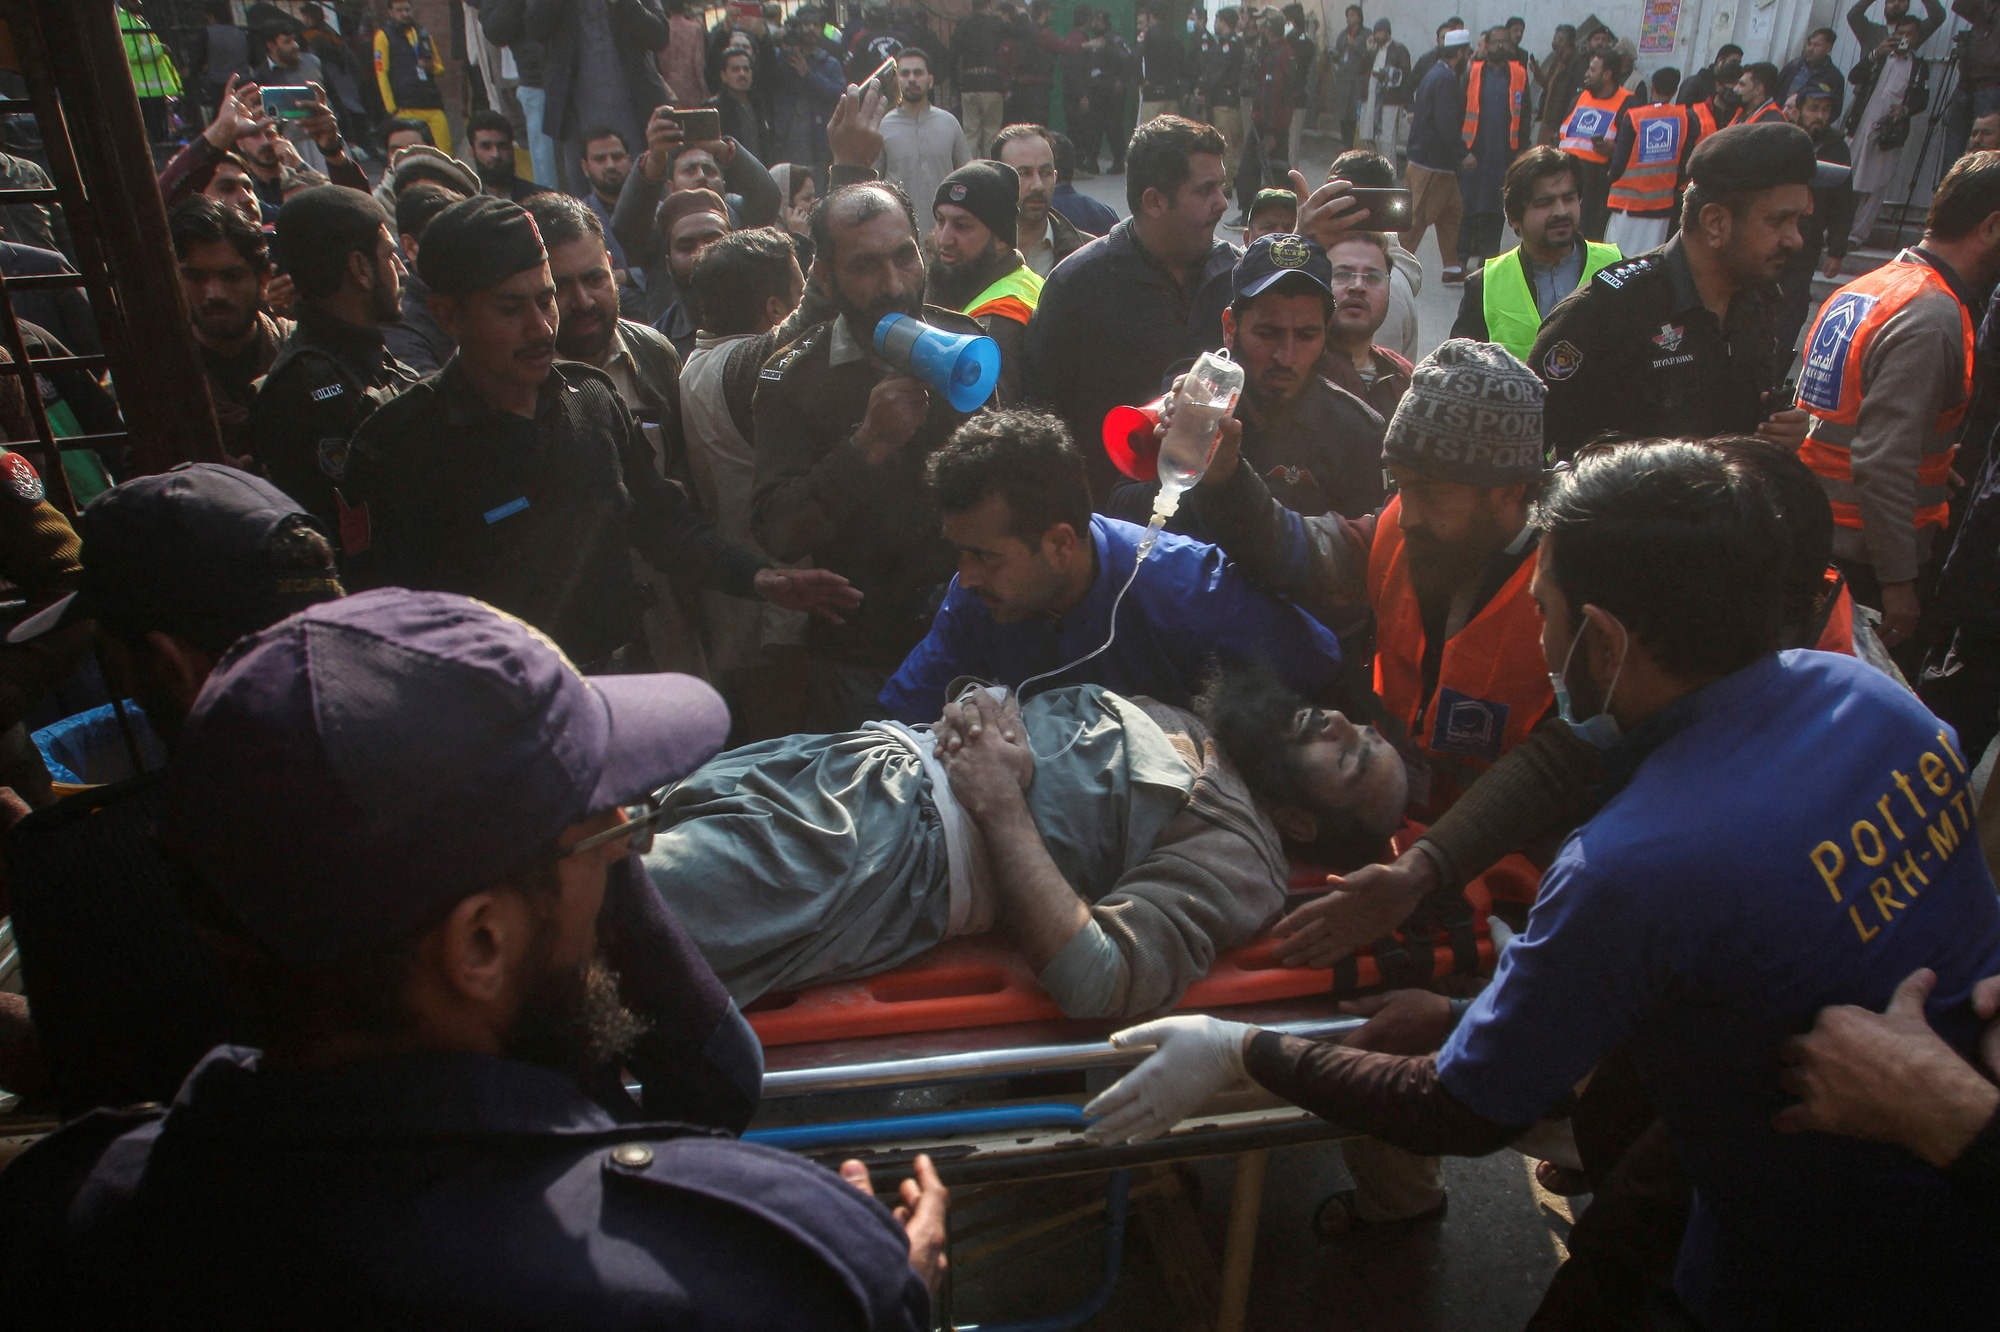 People injured in the explosion are taken to a hospital in Peshawar, Pakistan, January 30 - Photo: REUTERS